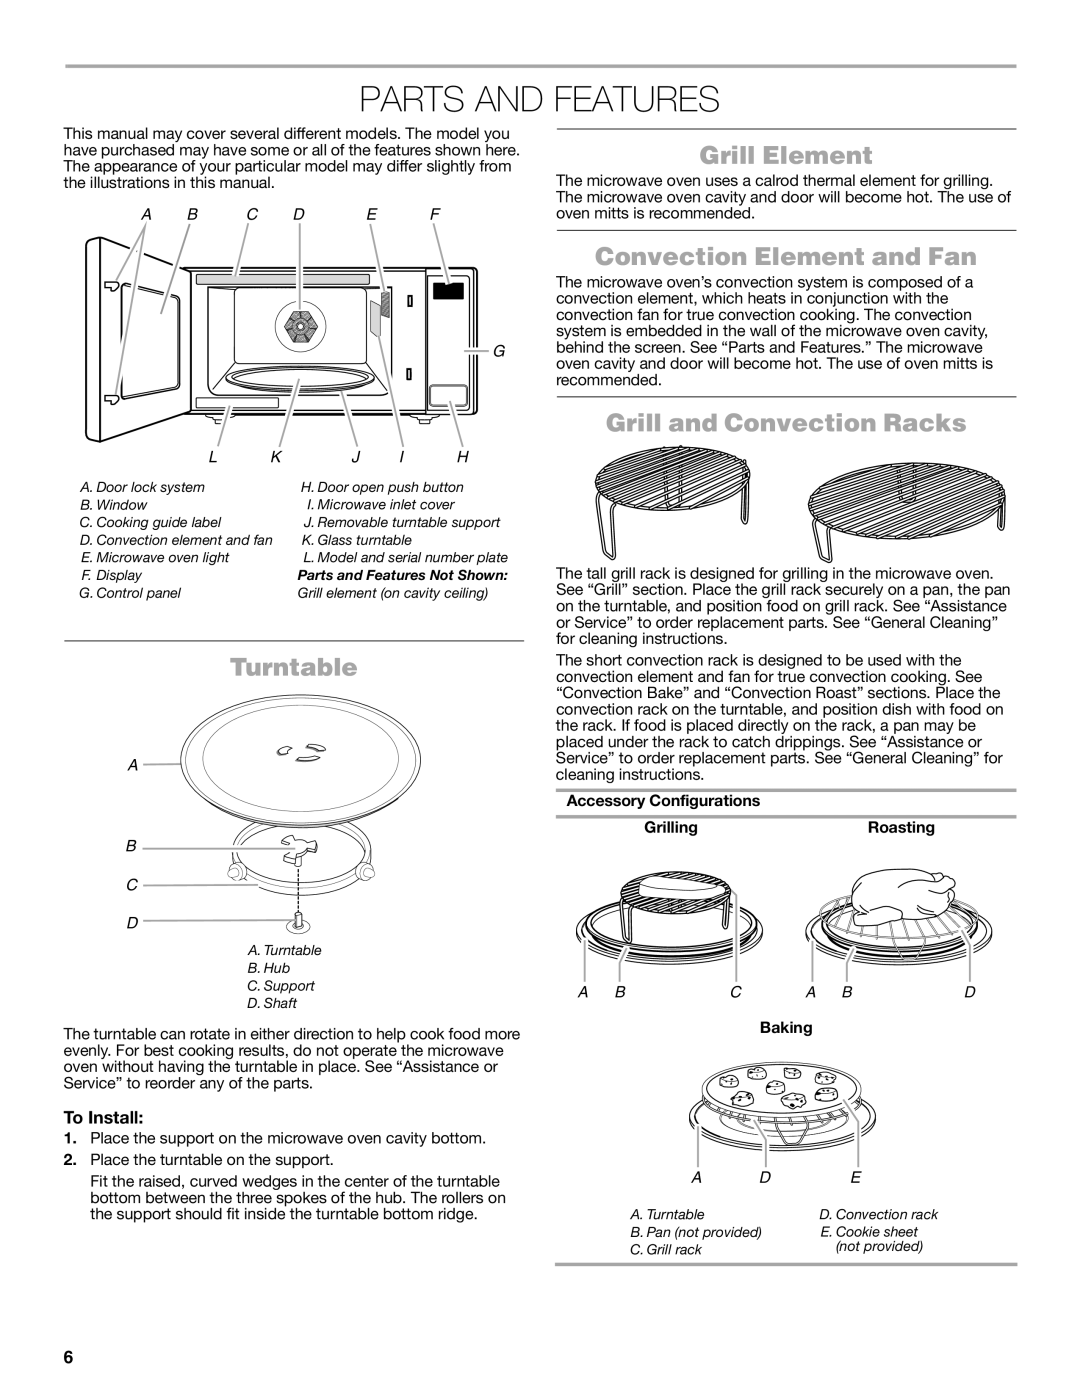 Jenn-Air W10491278A Parts And Features, Turntable, Grill Element, Convection Element and Fan, Grill and Convection Racks 